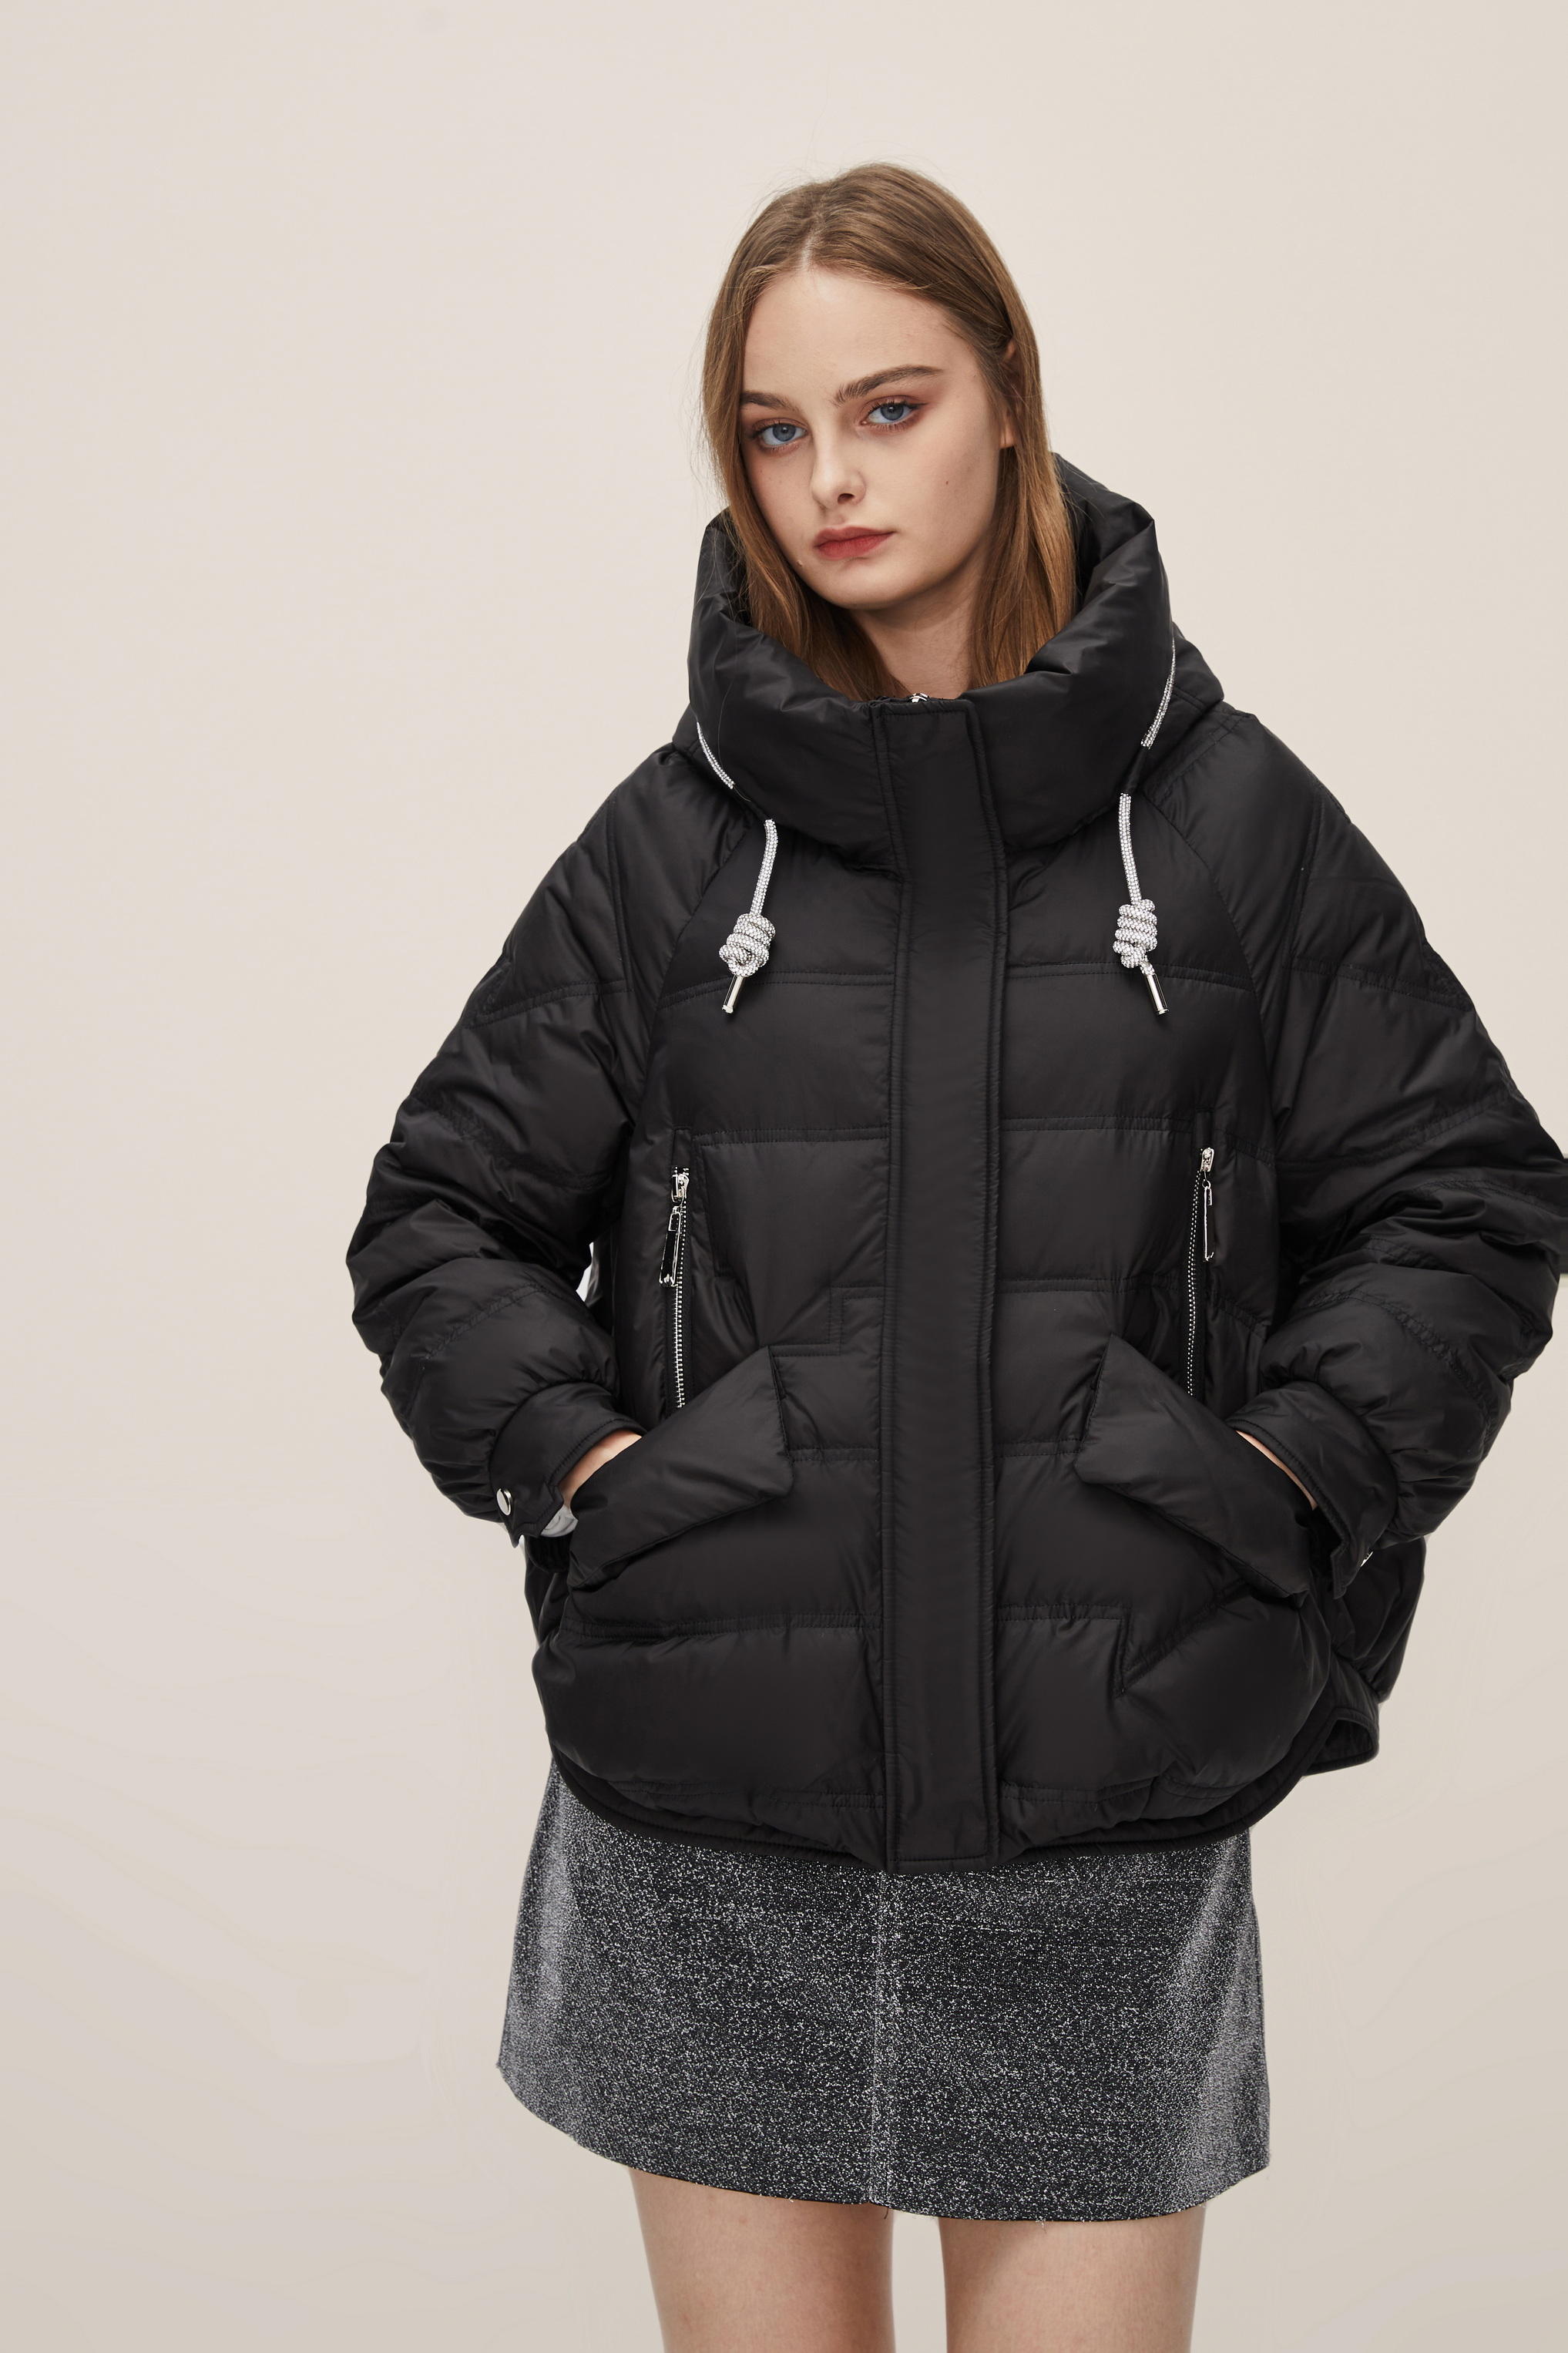 Cold Resistant And Loose Fitting Fashionable Hooded Short Down Jacket